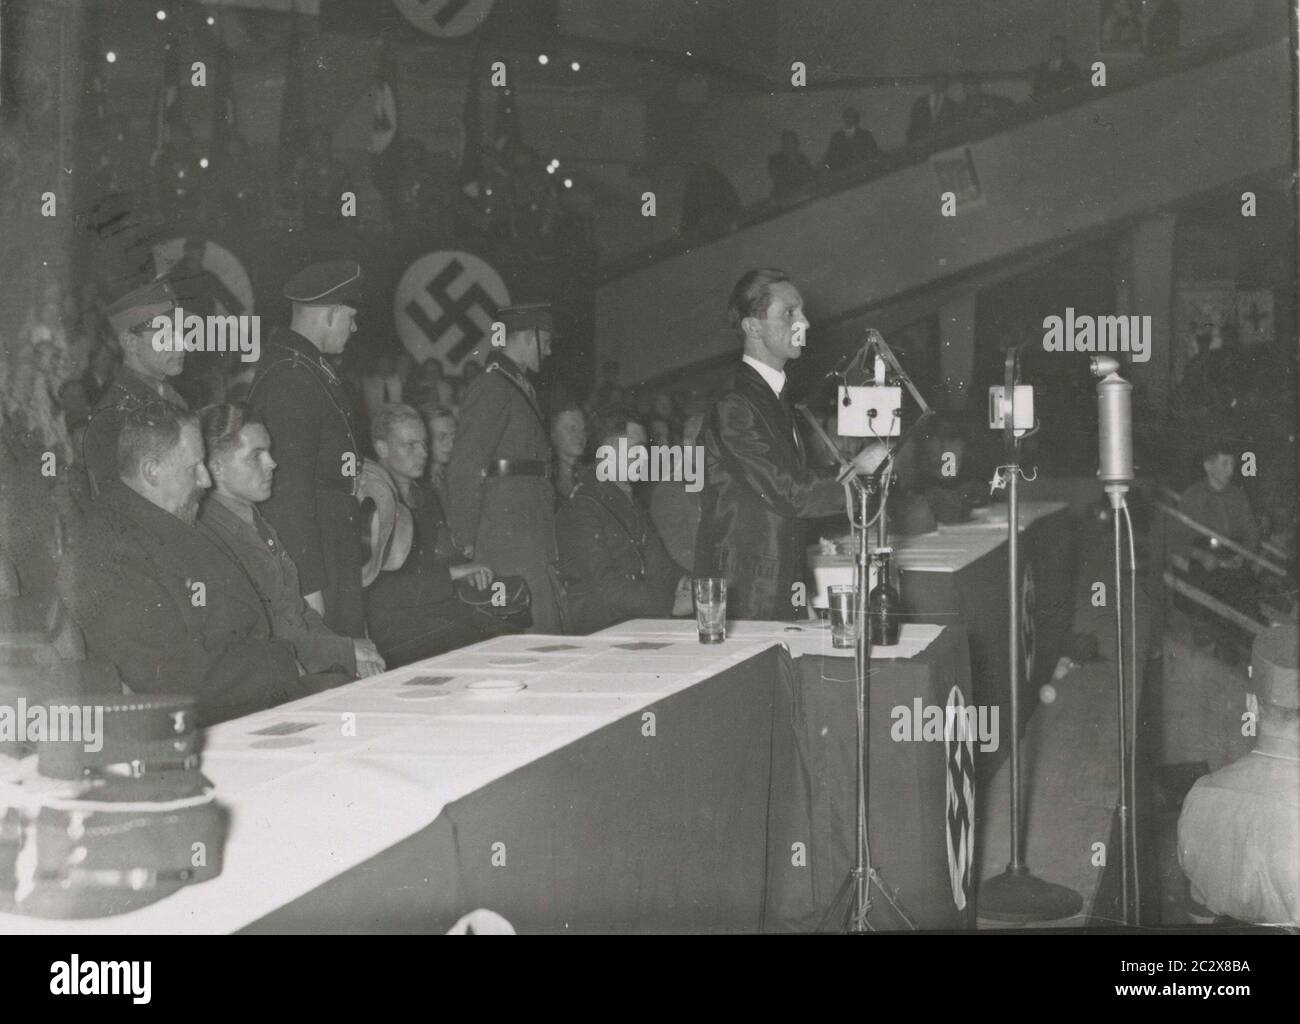 Rally in the Sportpalast Berlin, Dr. Goebbels speaks Heinrich Hoffmann Photographs 1933 Adolf Hitler's official photographer, and a Nazi politician and publisher, who was a member of Hitler's intimate circle. Stock Photo